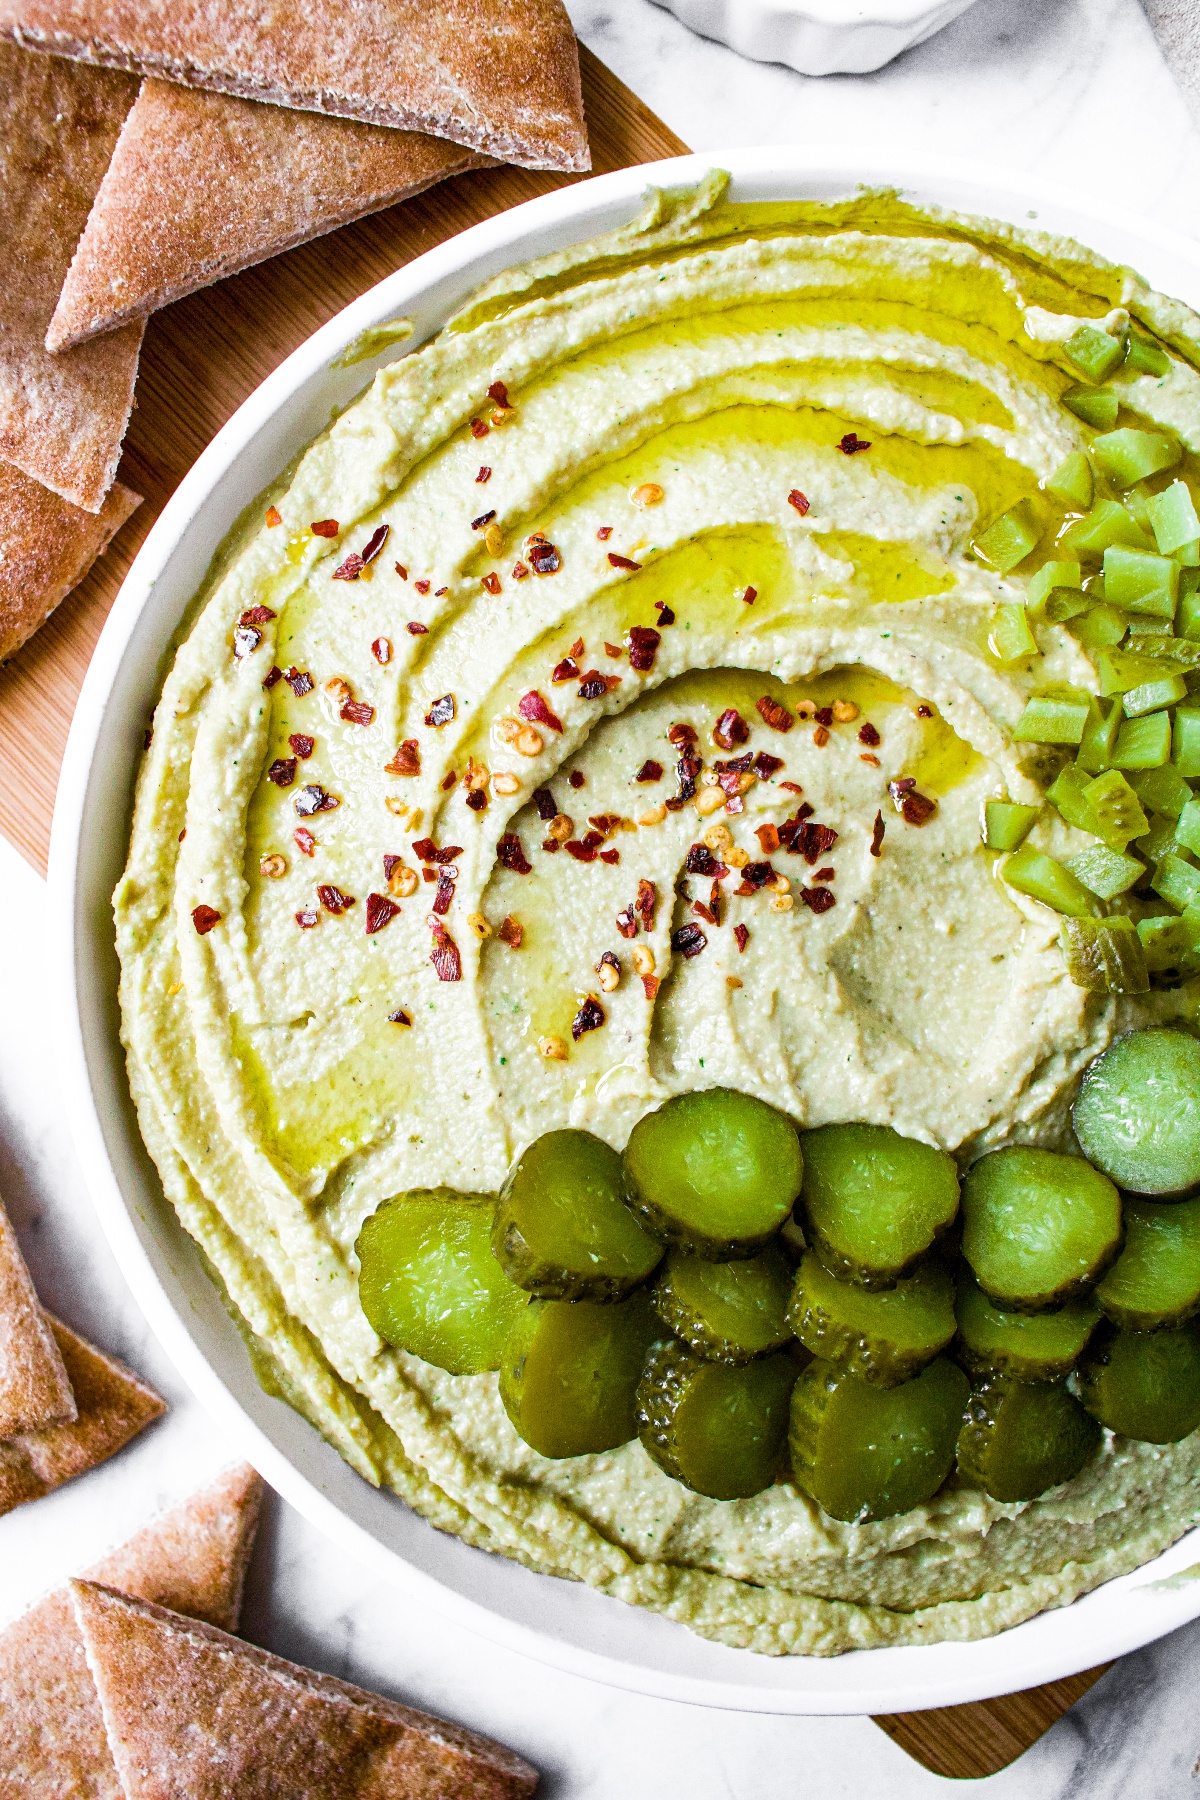 Overhead shot of a plate of homemade trader joes dill pickle hummus in a swirl pattern topped with sliced and chopped dill pickles, crushed red pepper flakes, and extra virgin olive oil. The plate is surrounded by air fryer pita chips.